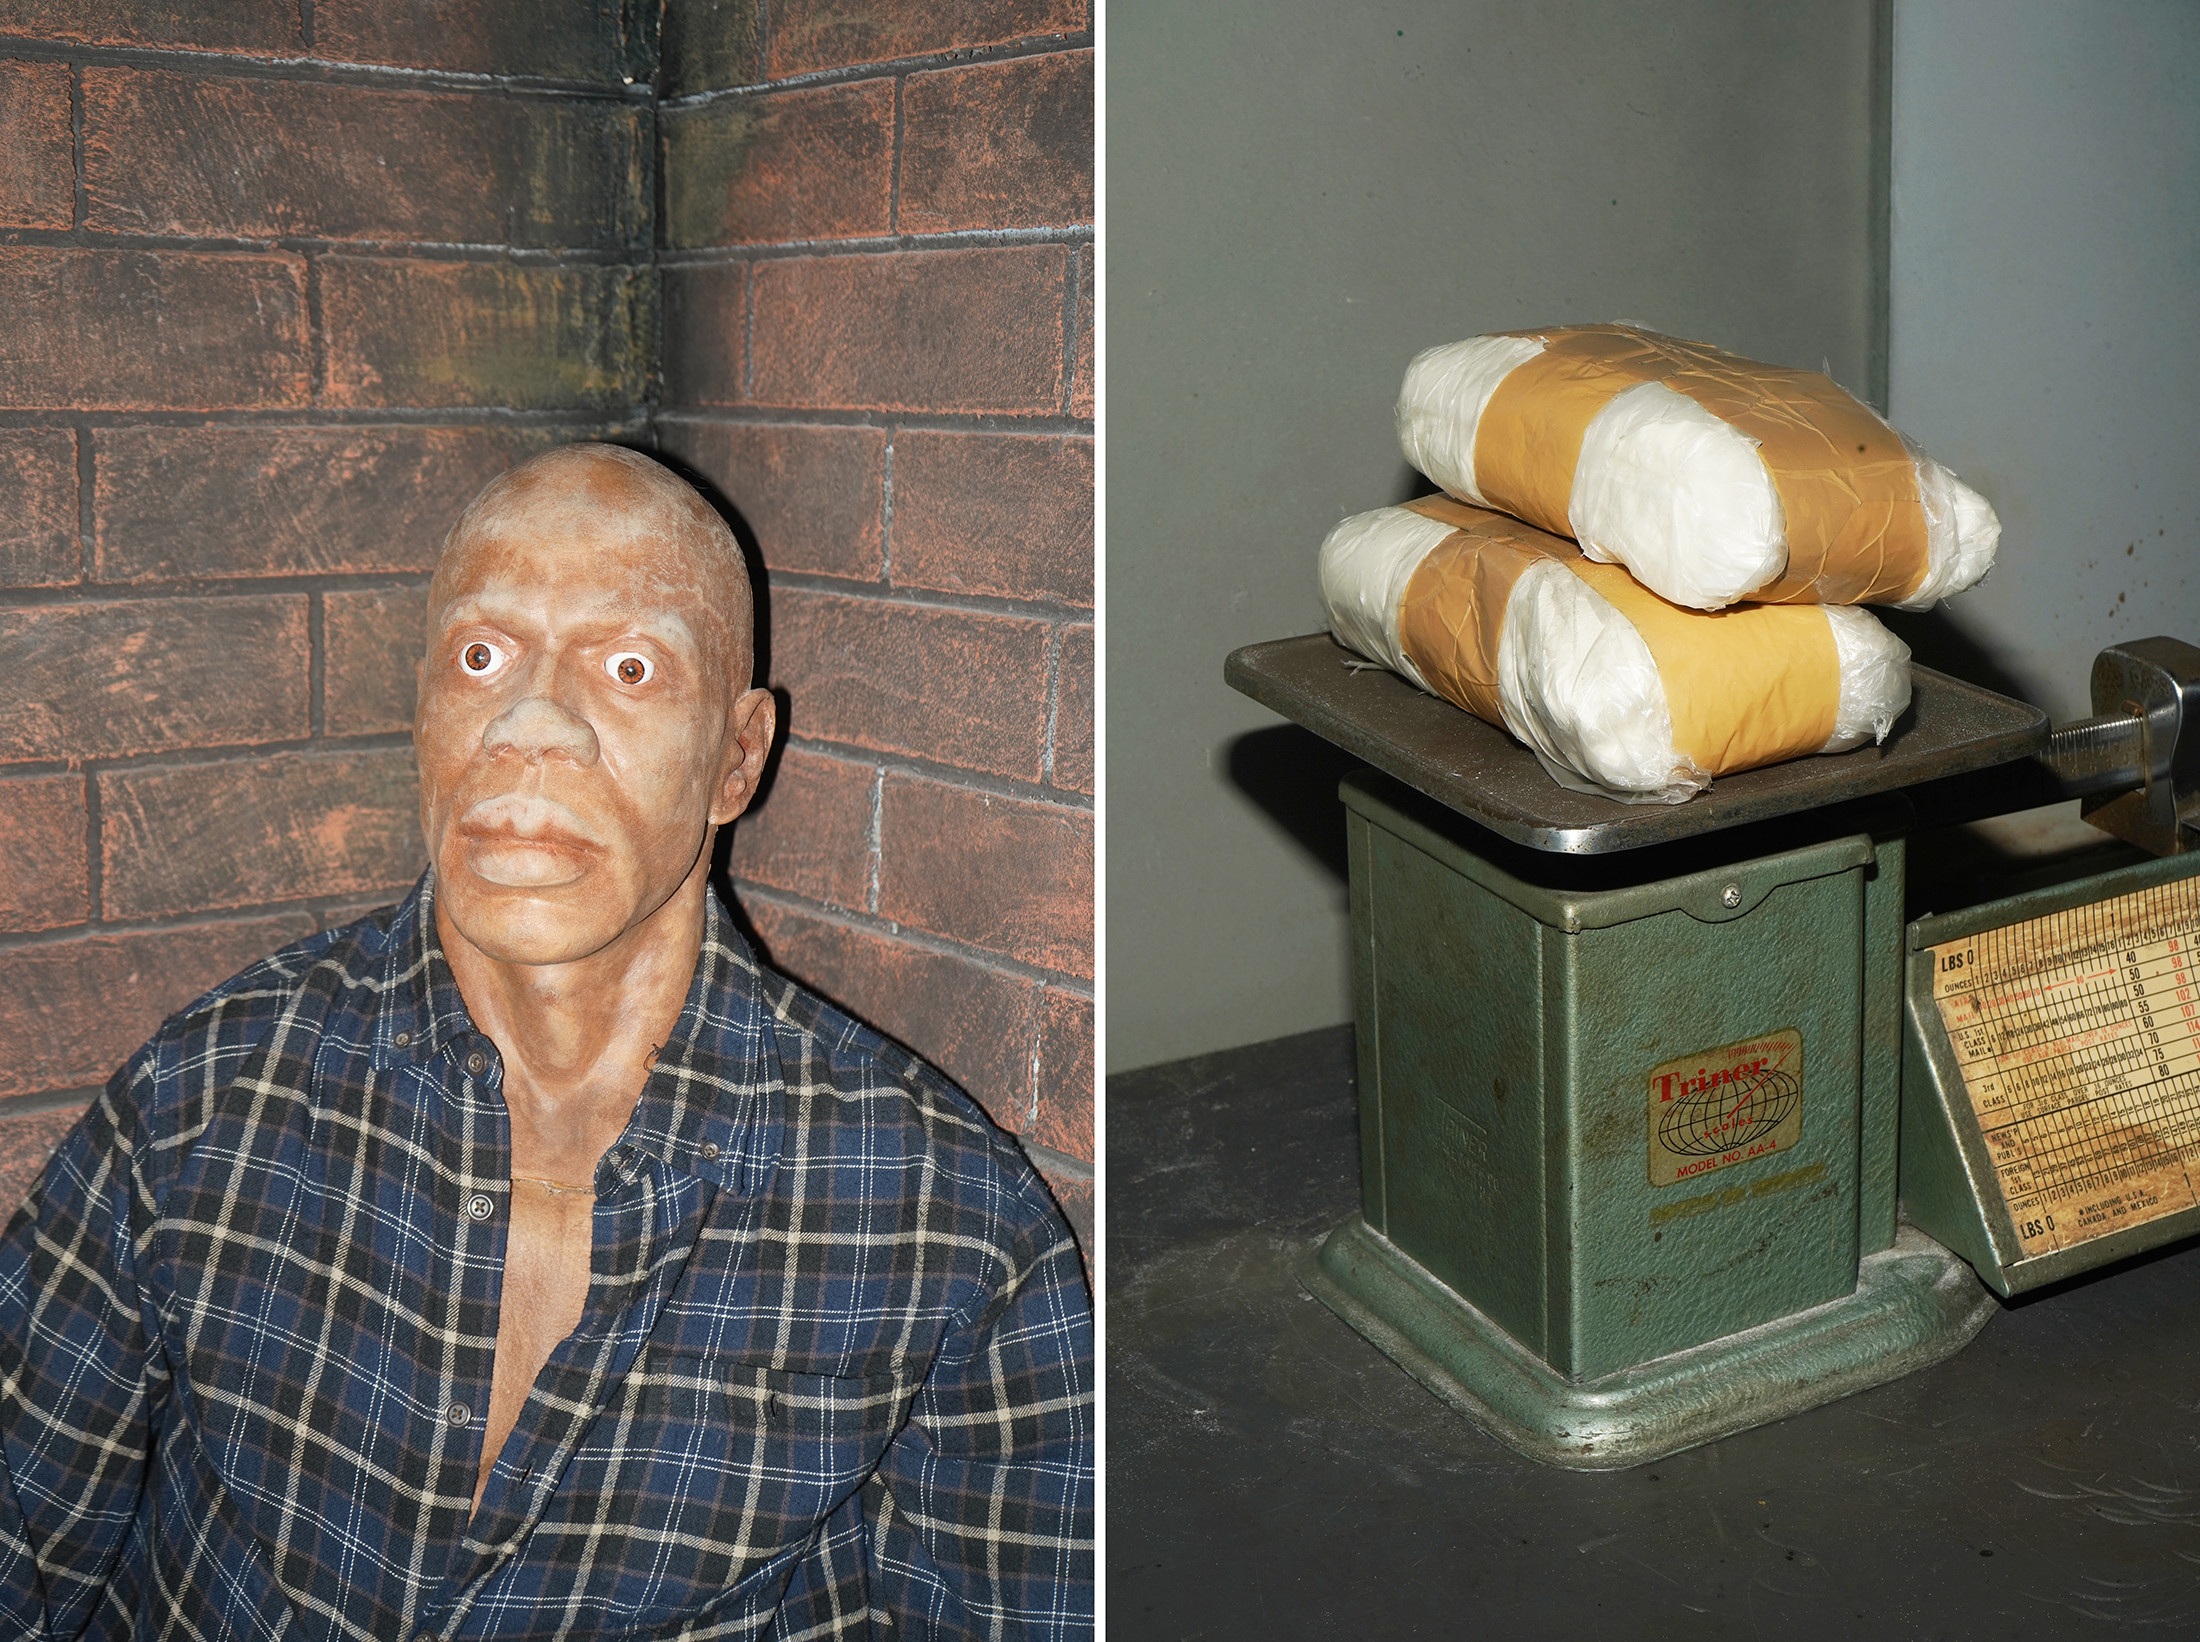 A split-screen image showing a model of a corpse on the left, and two bags of presumably fake cocaine on a scale on the right